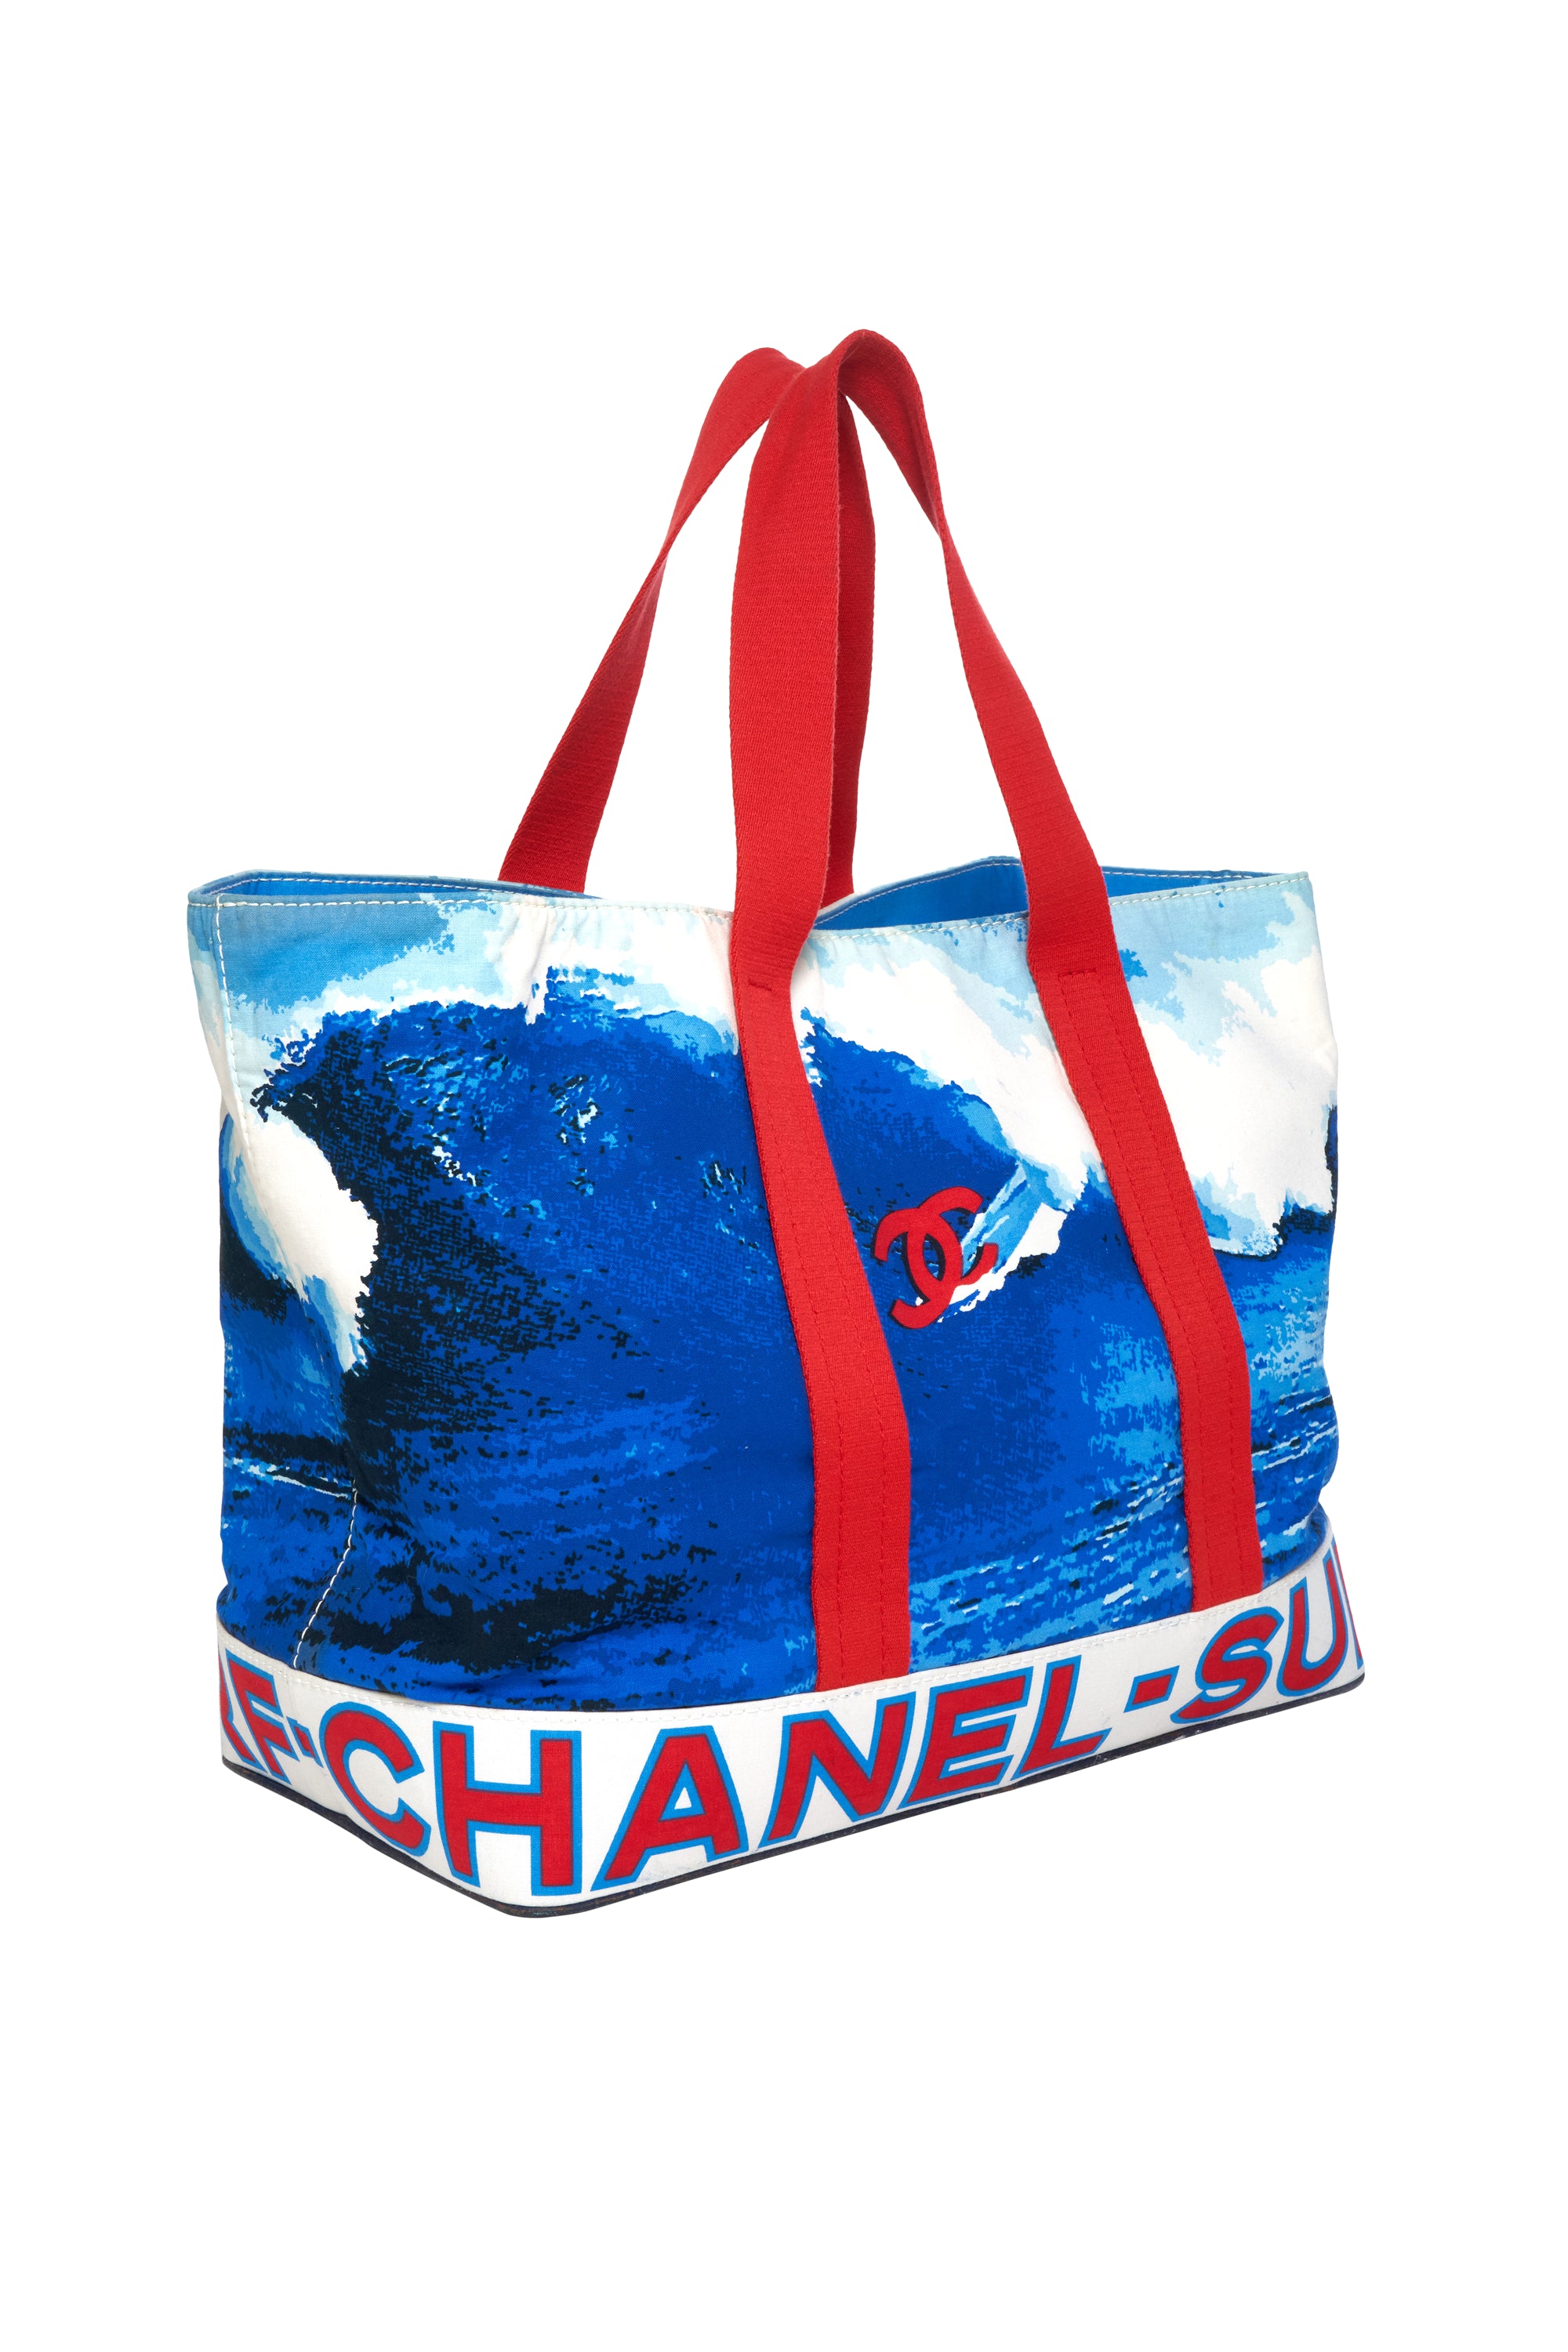 Chanel Red and Blue Surfing CC Wave Tote 2002 XL